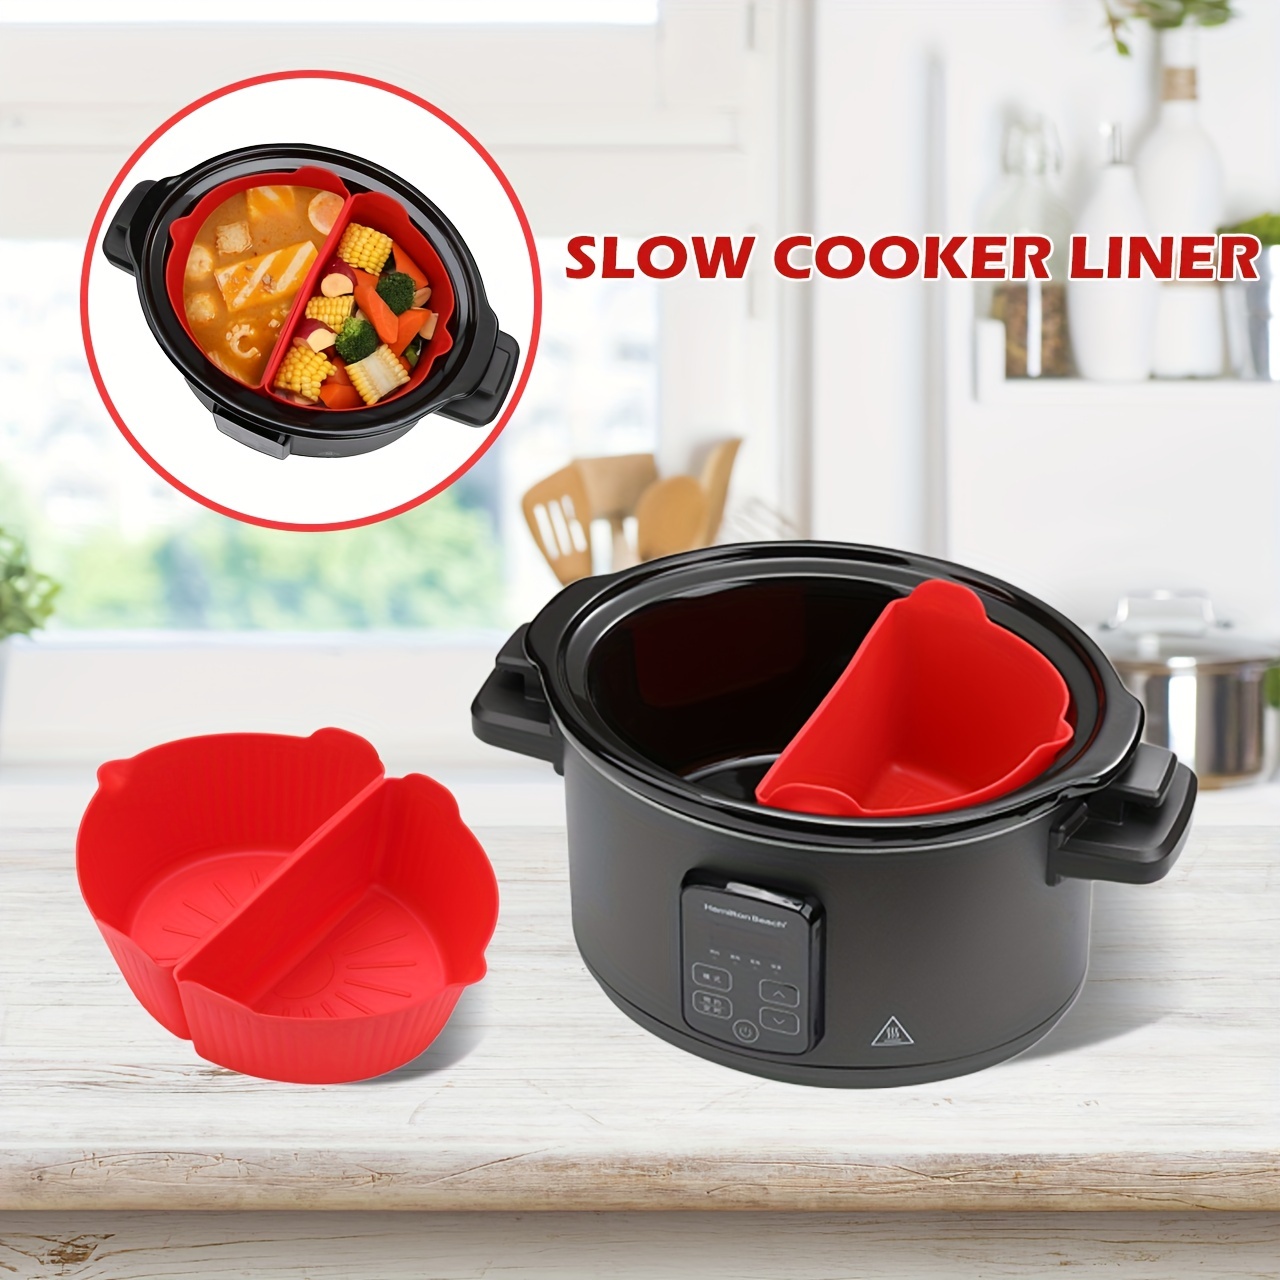 Silicone Slow Cooker Liners, Reusable Cooking Liner Fit Crock-Pot 6-8  Quarts Slow Cooker, Leakproof Dishwasher Safe Cooker Bags Liners for Oval  or